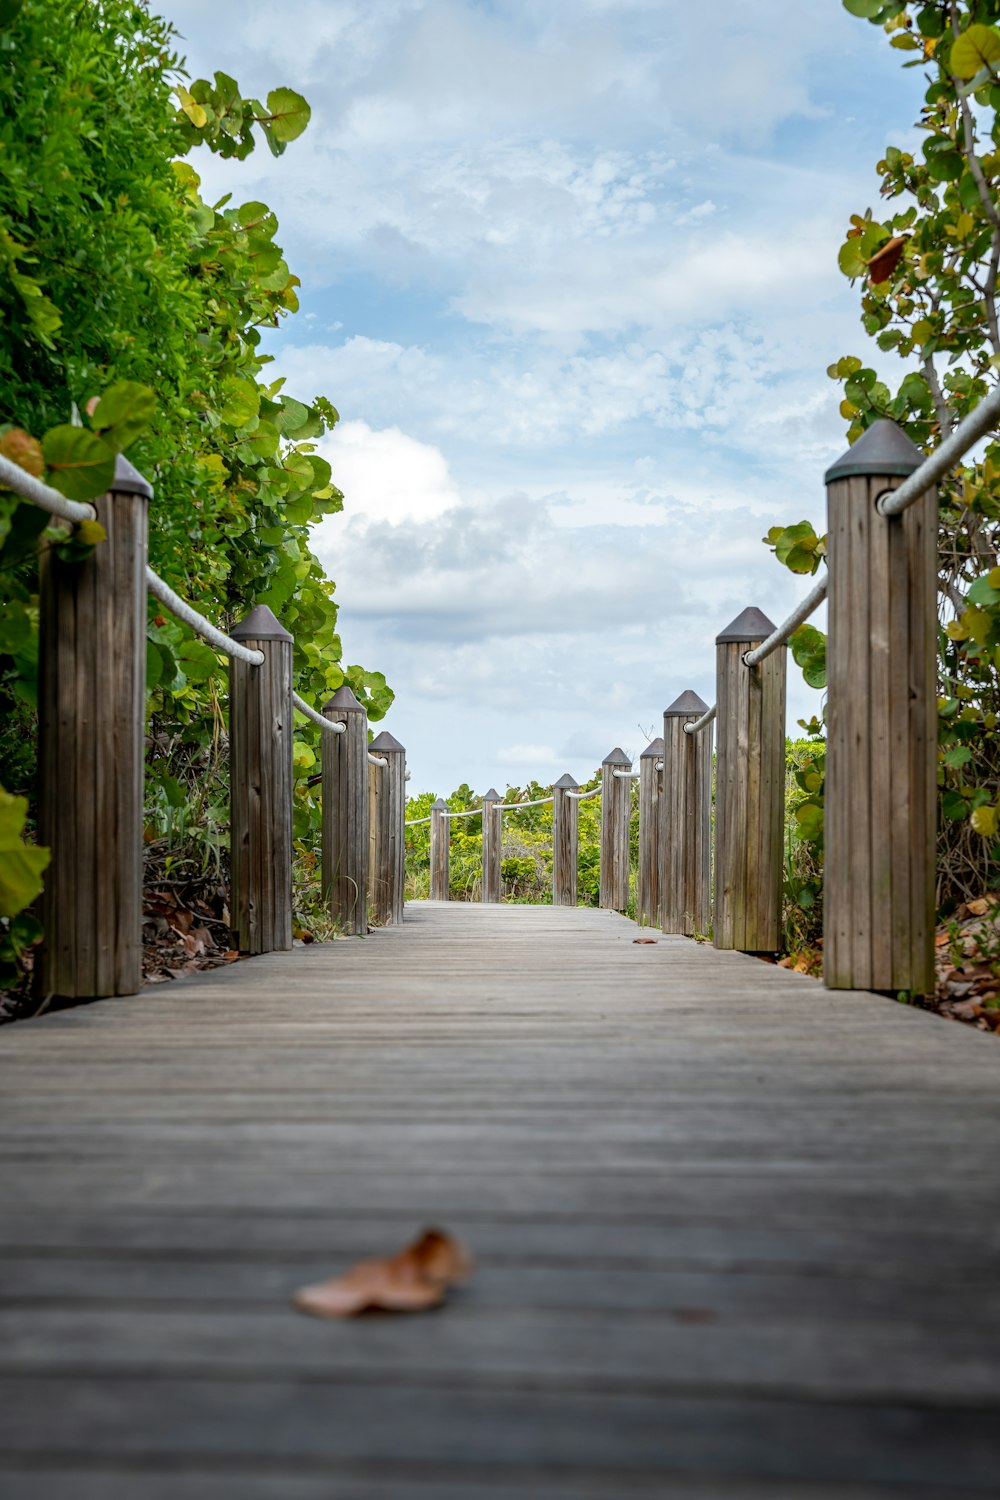 a wooden walkway surrounded by lush green trees